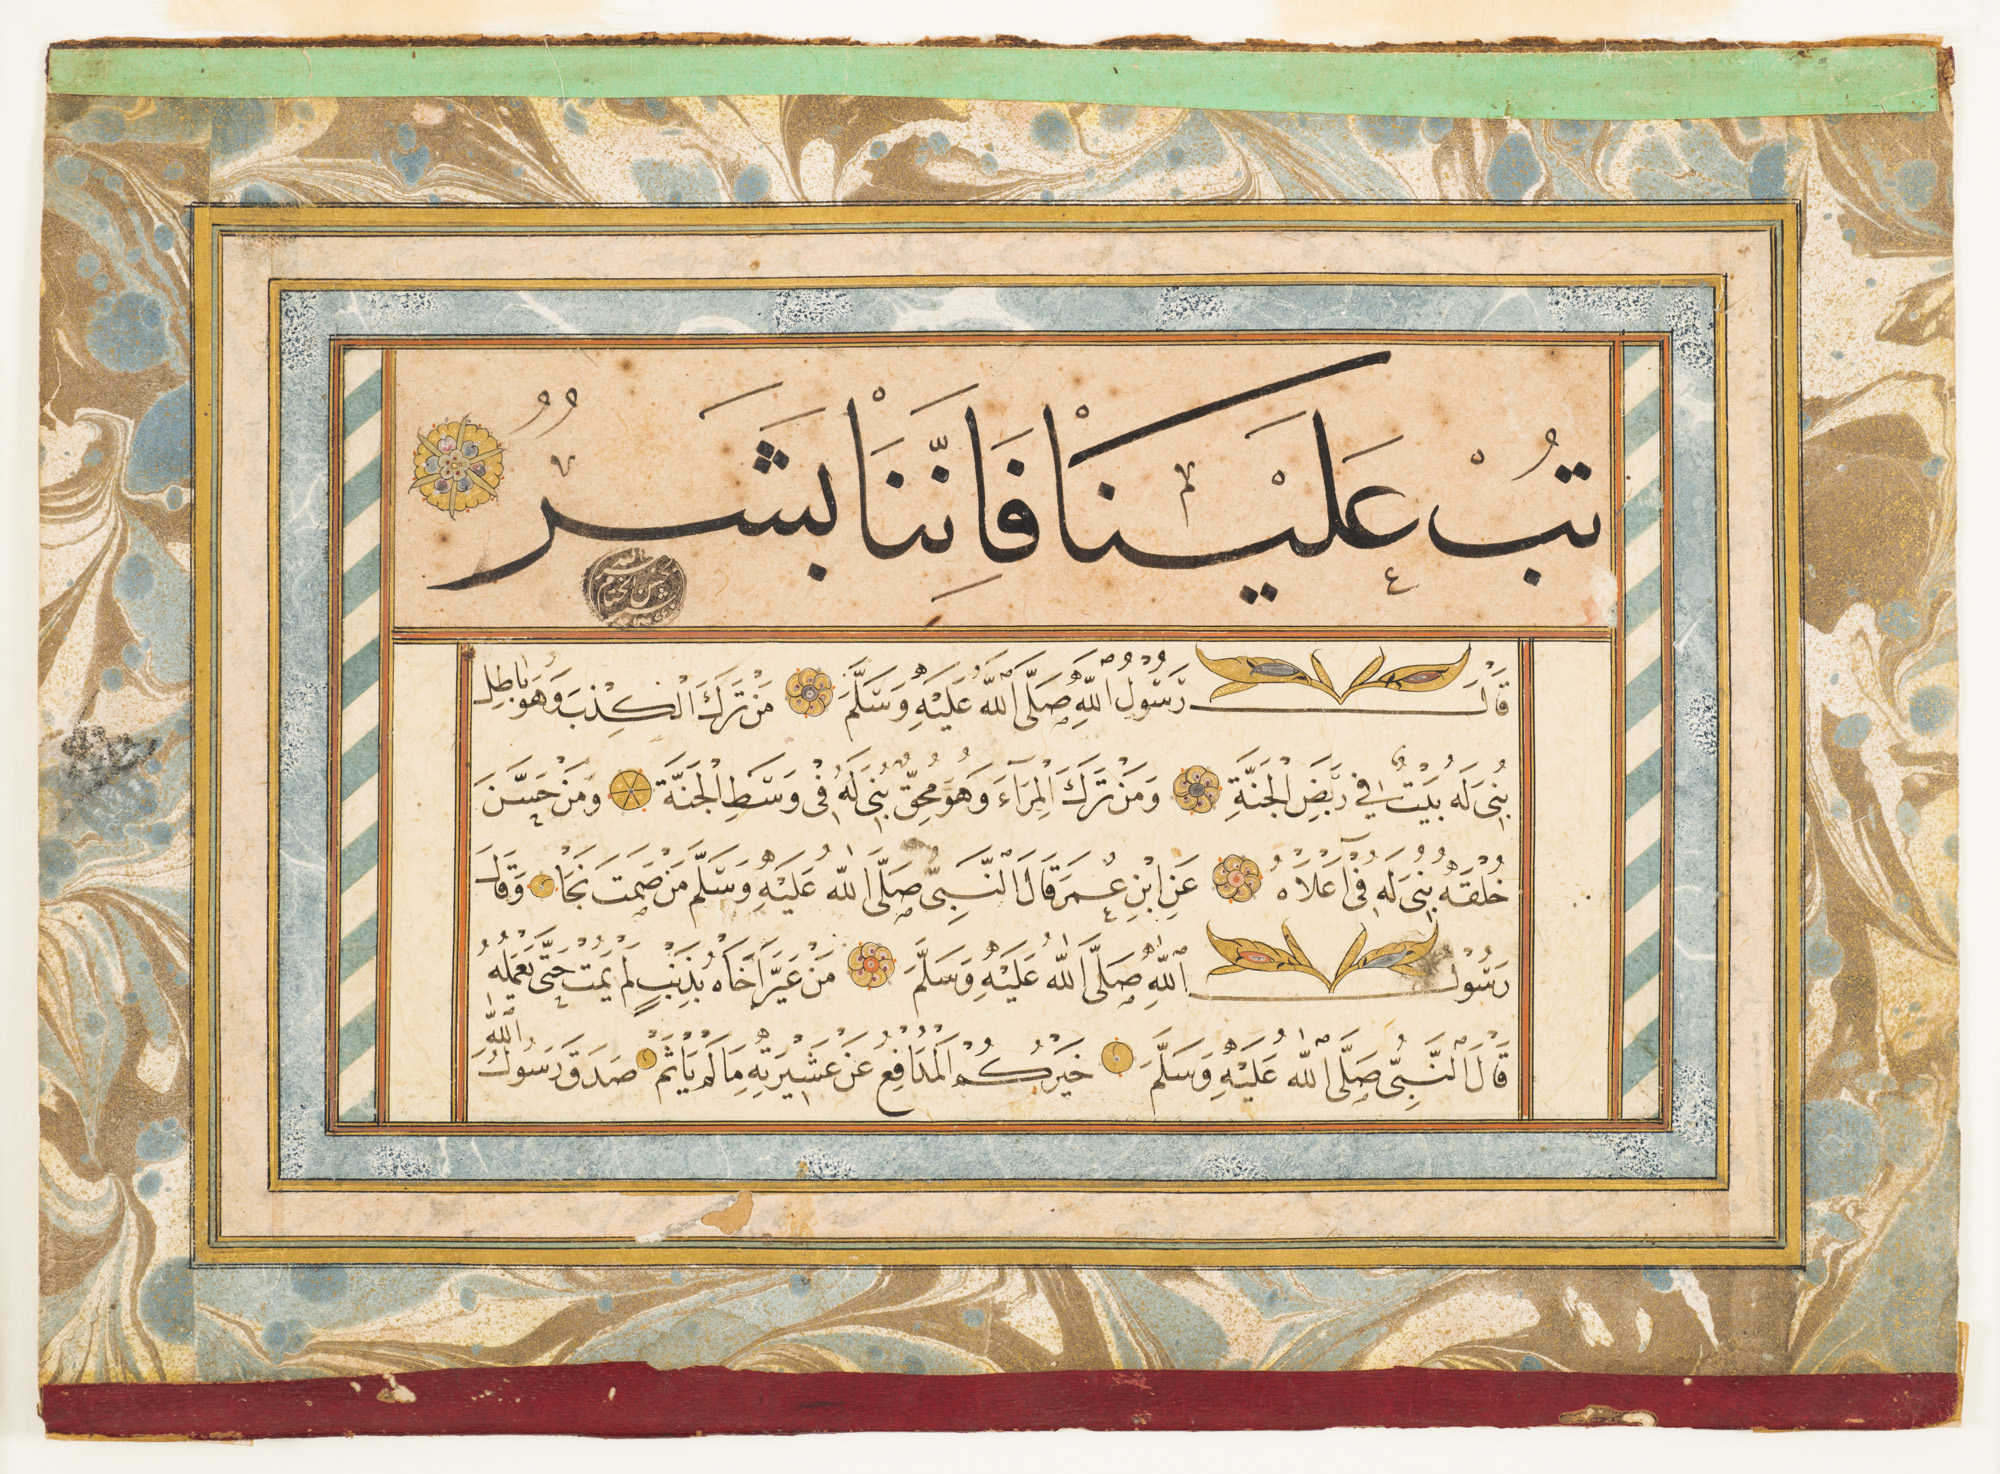 A Calligraphic Compilation of the Prophet Muhammad’s Words and Deeds (Hadith) by Unknown Artist - 18th century Cincinnati Art Museum